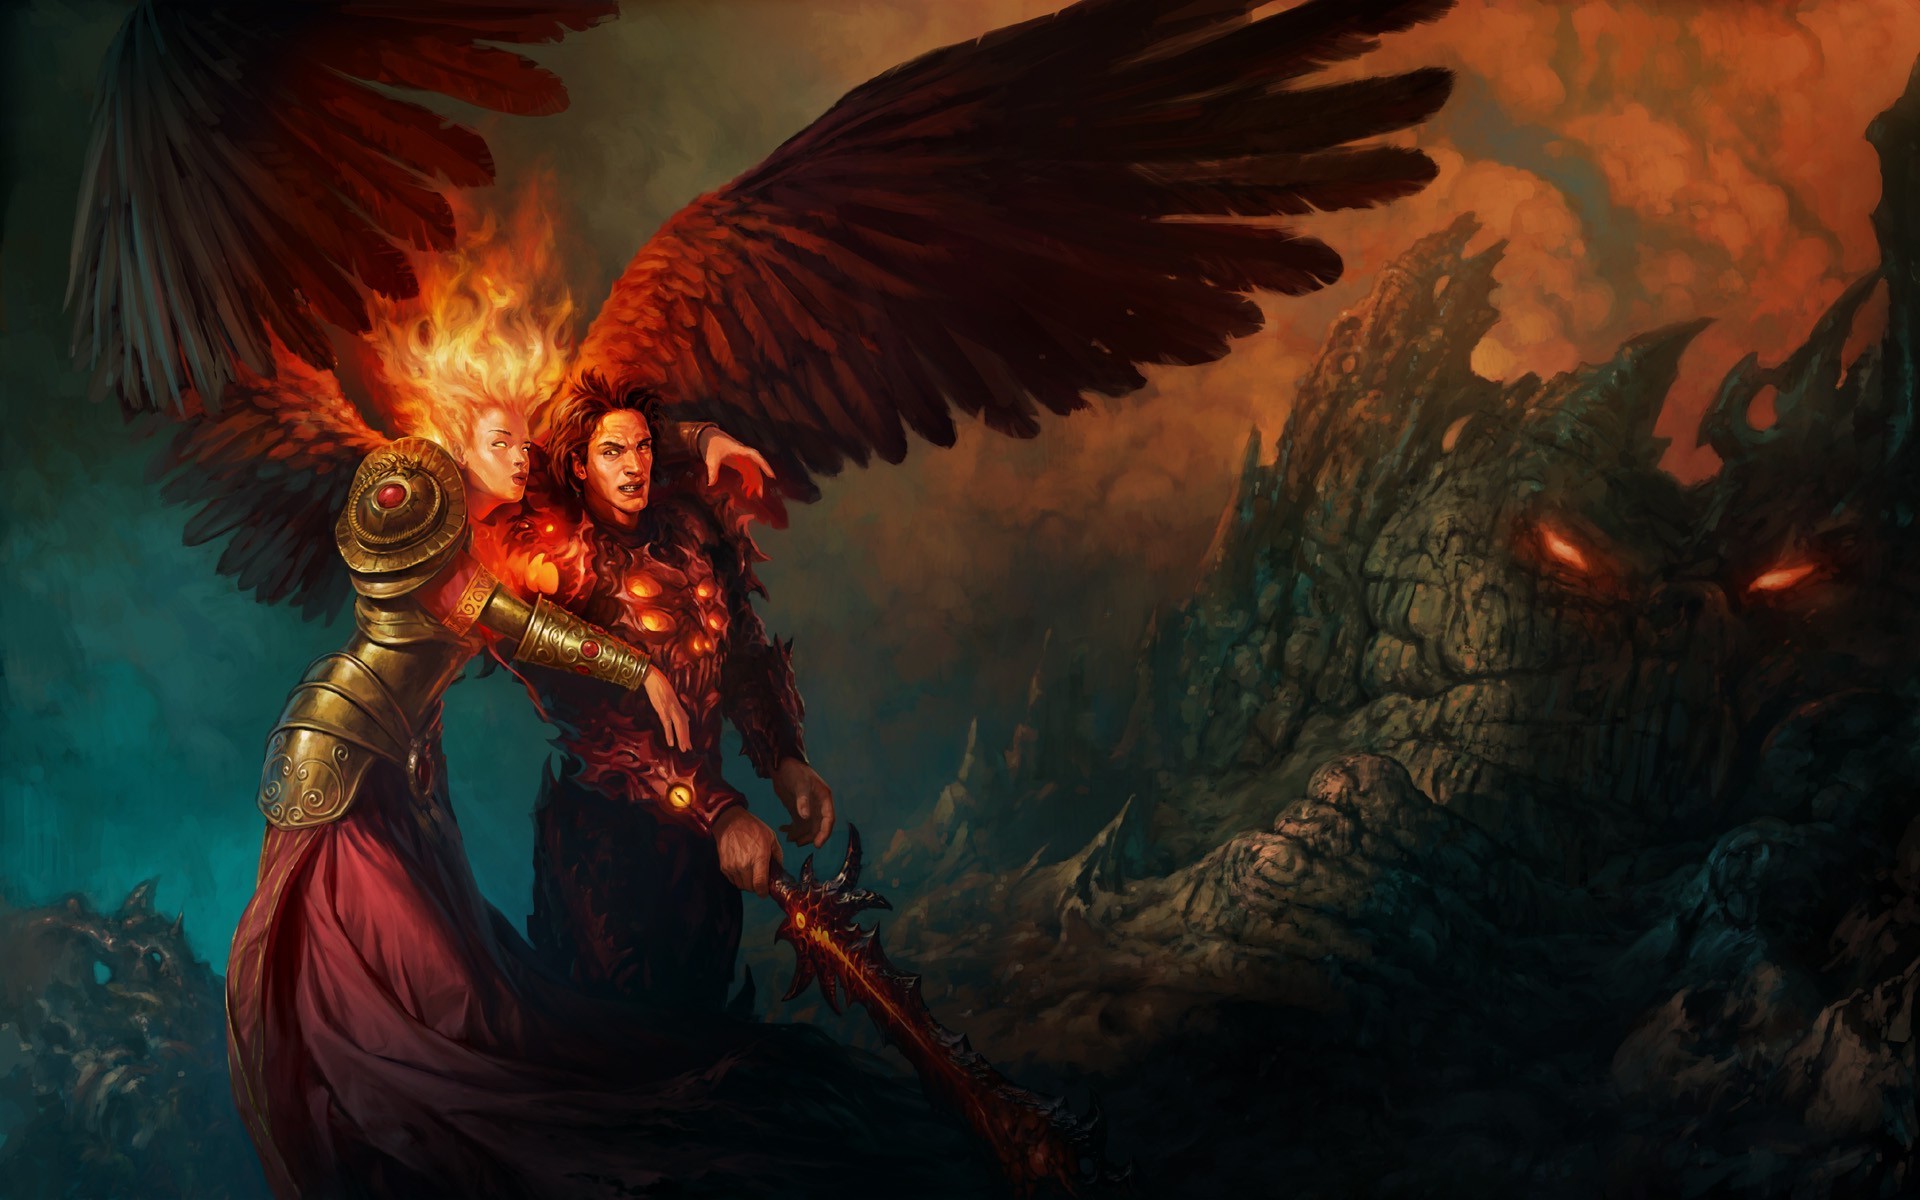 Heroes Of Might And Magic, Might And Magic, Artwork, Fantasy Art, Angel, Wings, Sword, Women, Fire Wallpaper